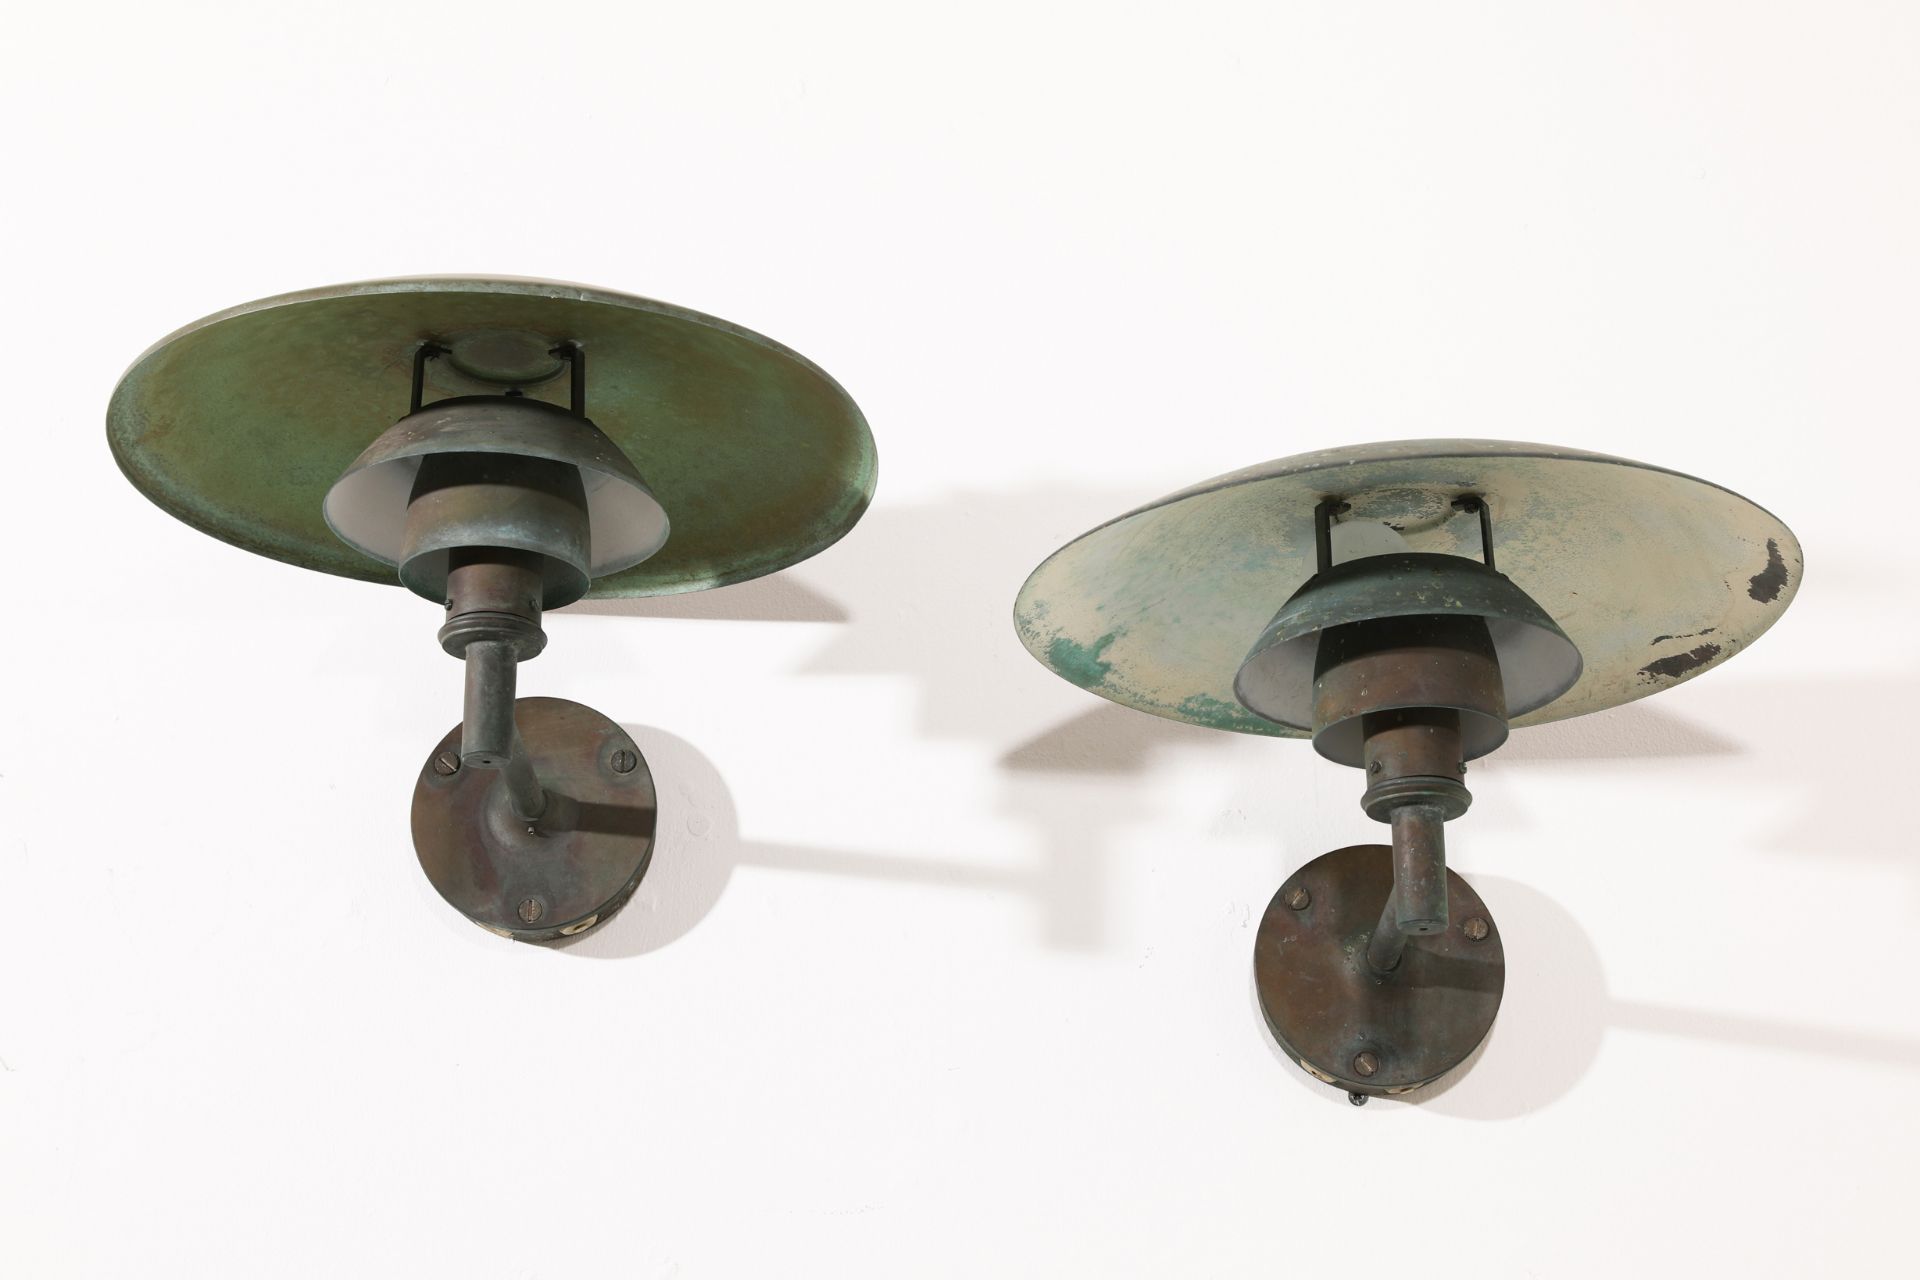 Poul Henningsen, Louis Poulsen, 2 wall Lights, model PH 4.5/3 for outdoor use - Image 3 of 7